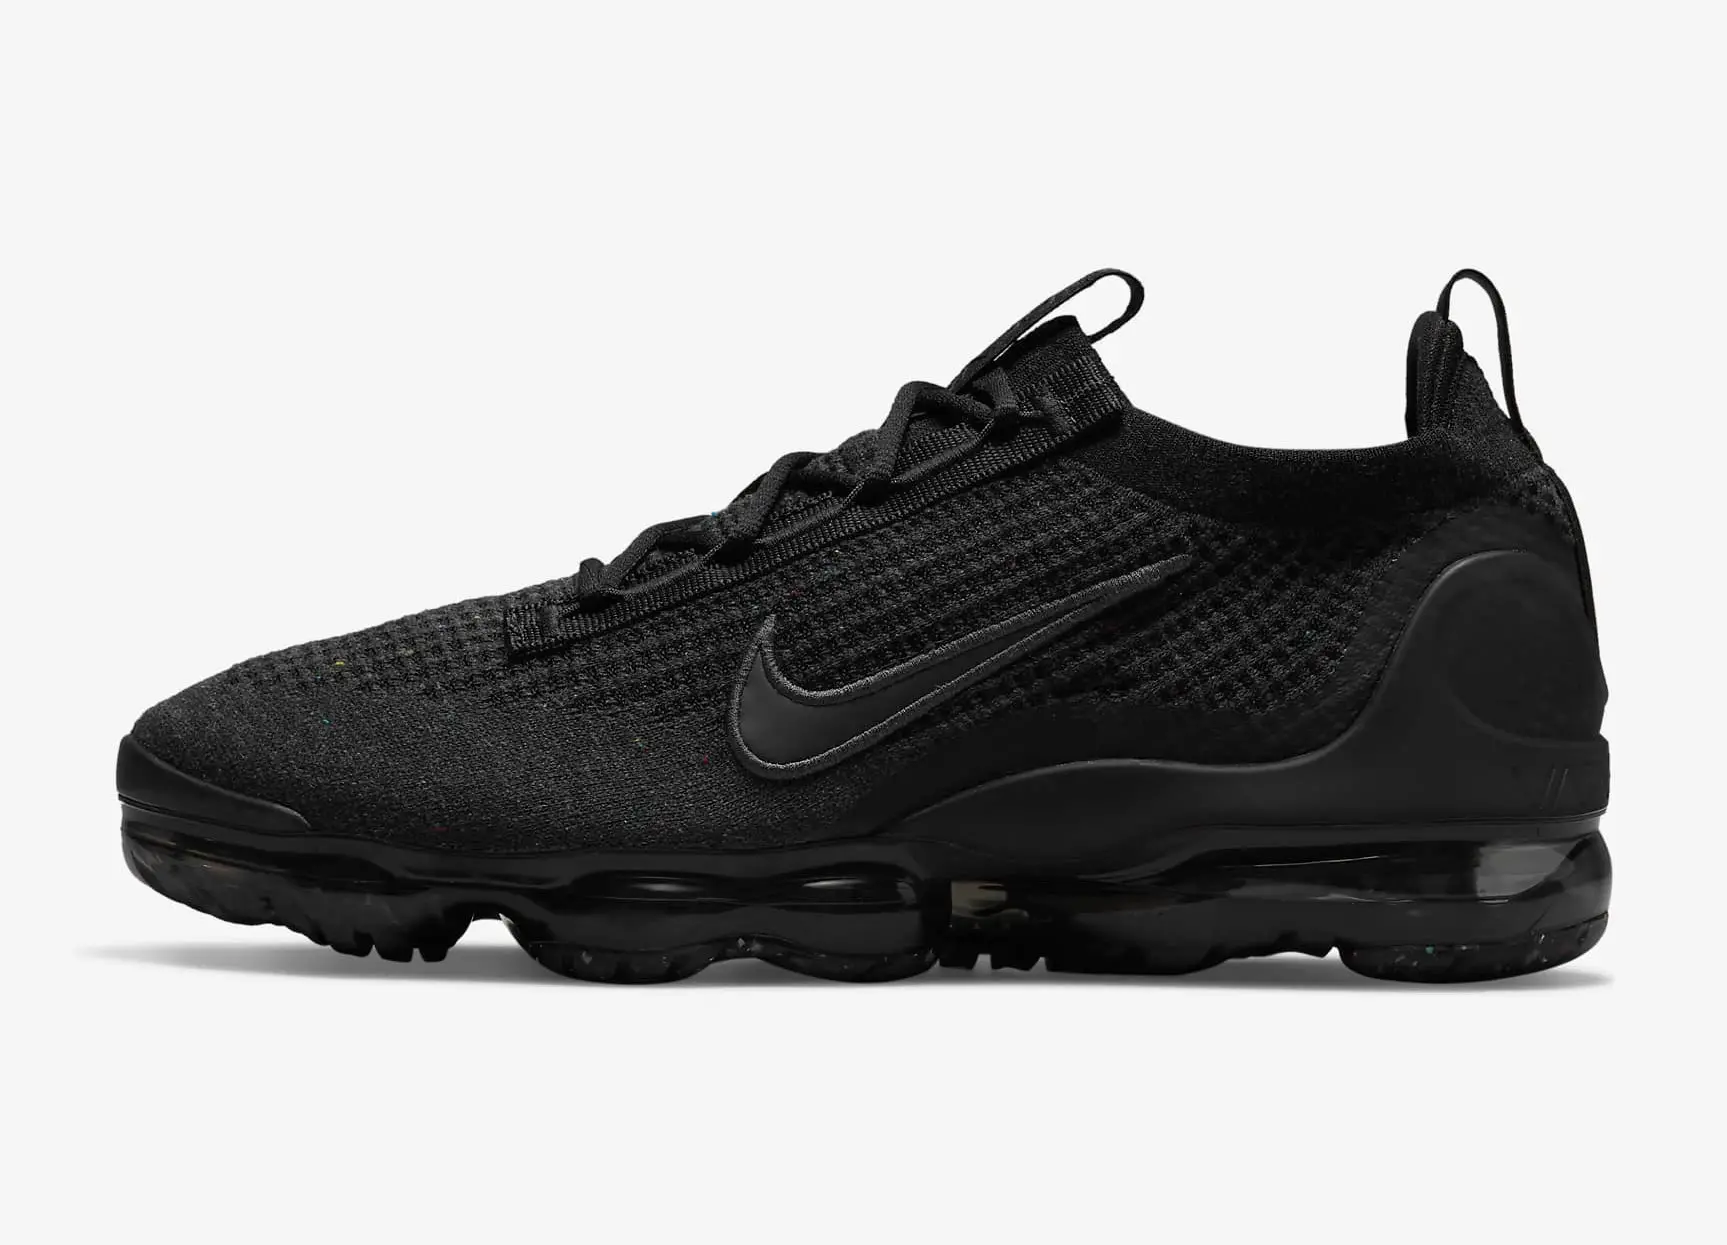 Are Vapormax Running Shoes?